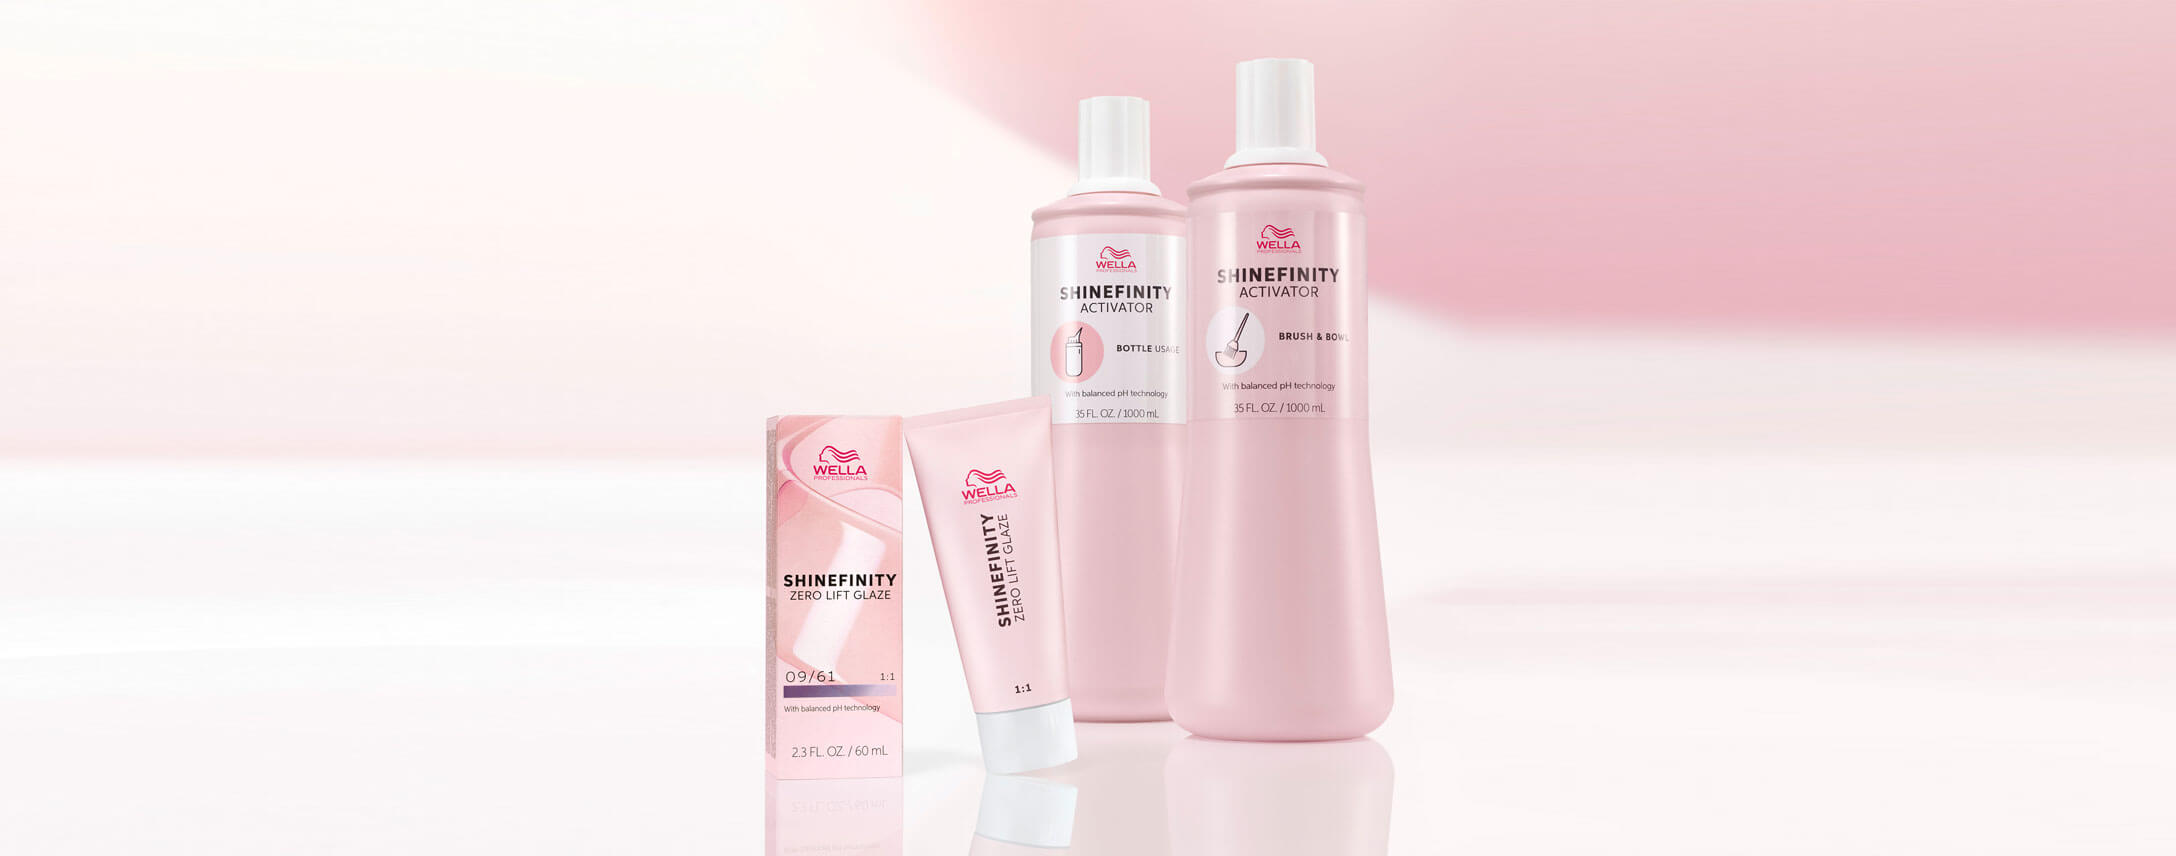 Zero lift, zero damage and maximum shine. Discover Wella’s brand new Shinefinity Glaze system and how it compares to glossing